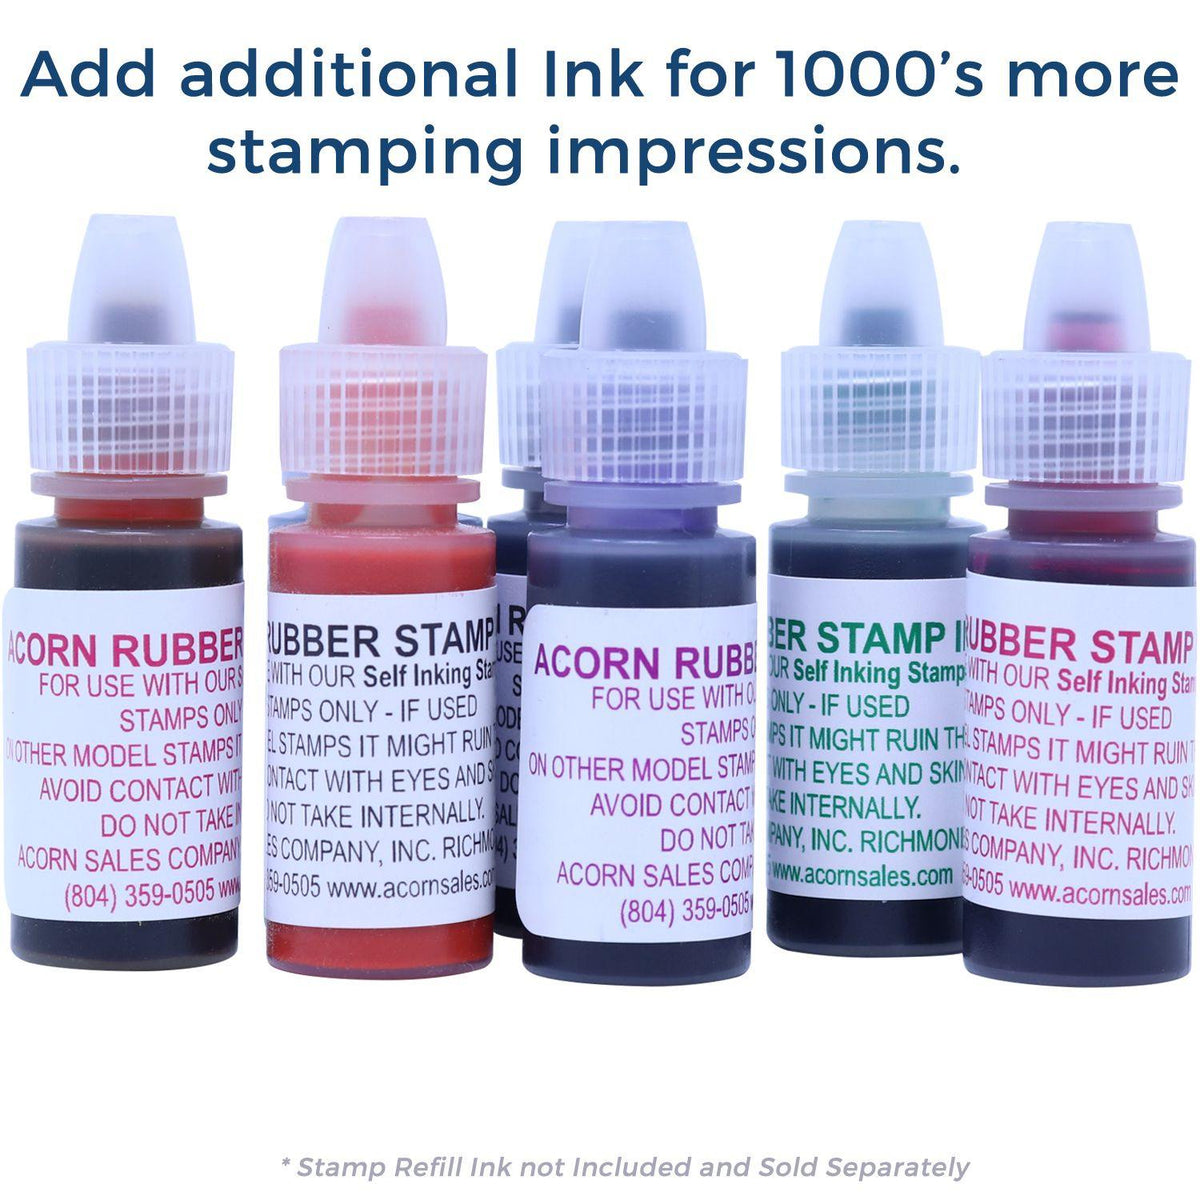 Refill Inks for Large Pre-Inked Covid-19 Tested Stamp Available